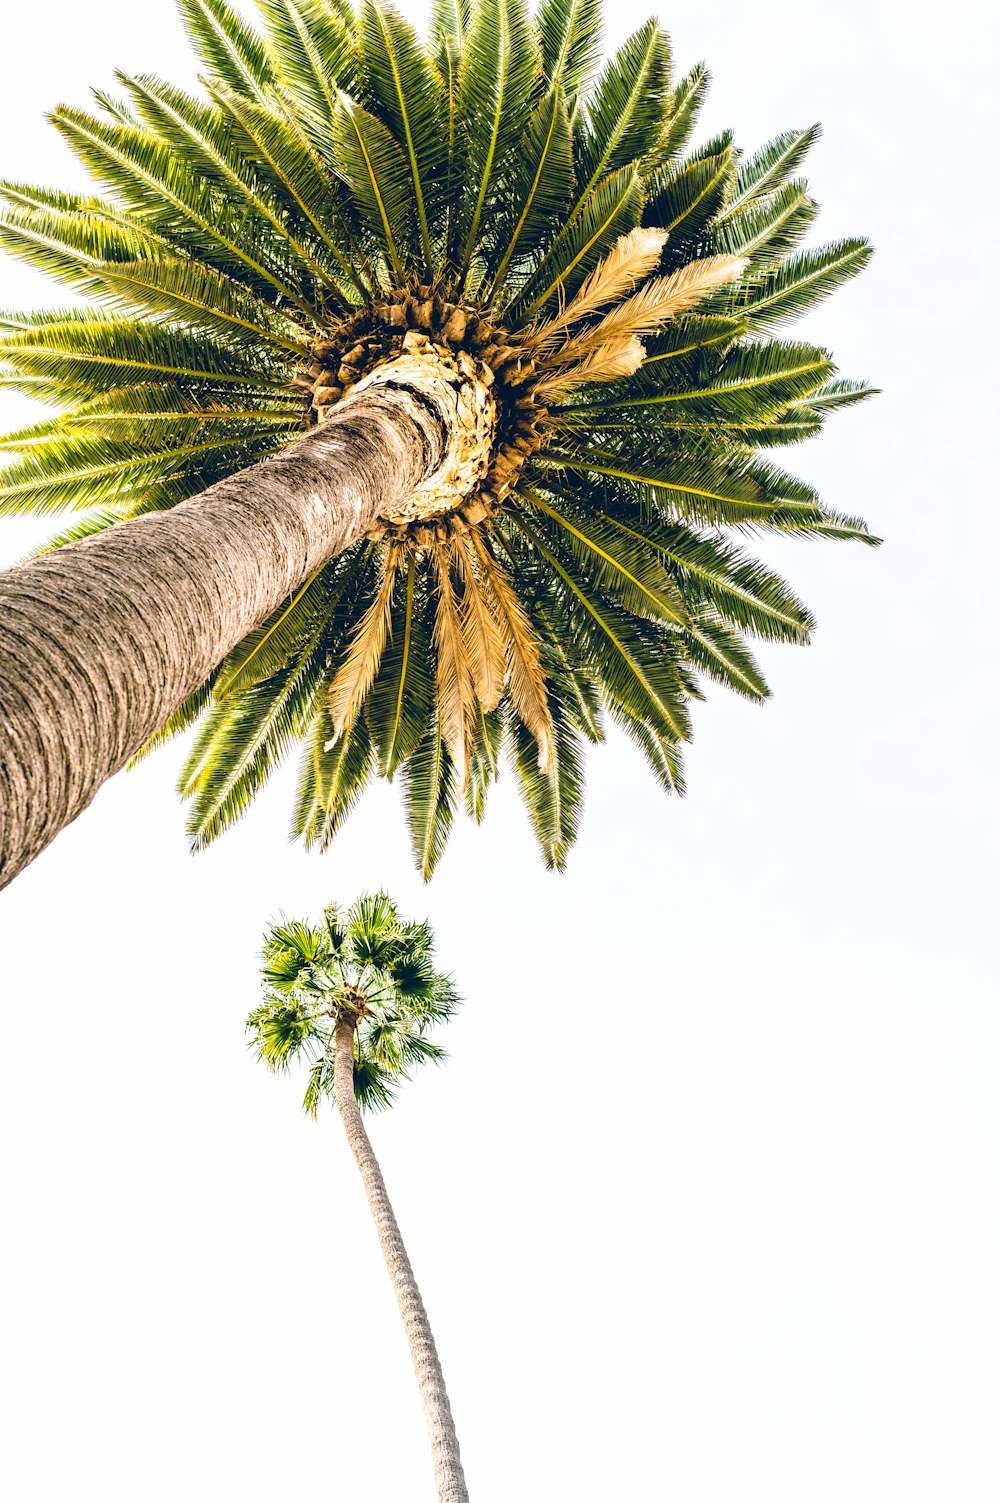 Palm Tree Background Pictures  Download Free Images on Unsplash